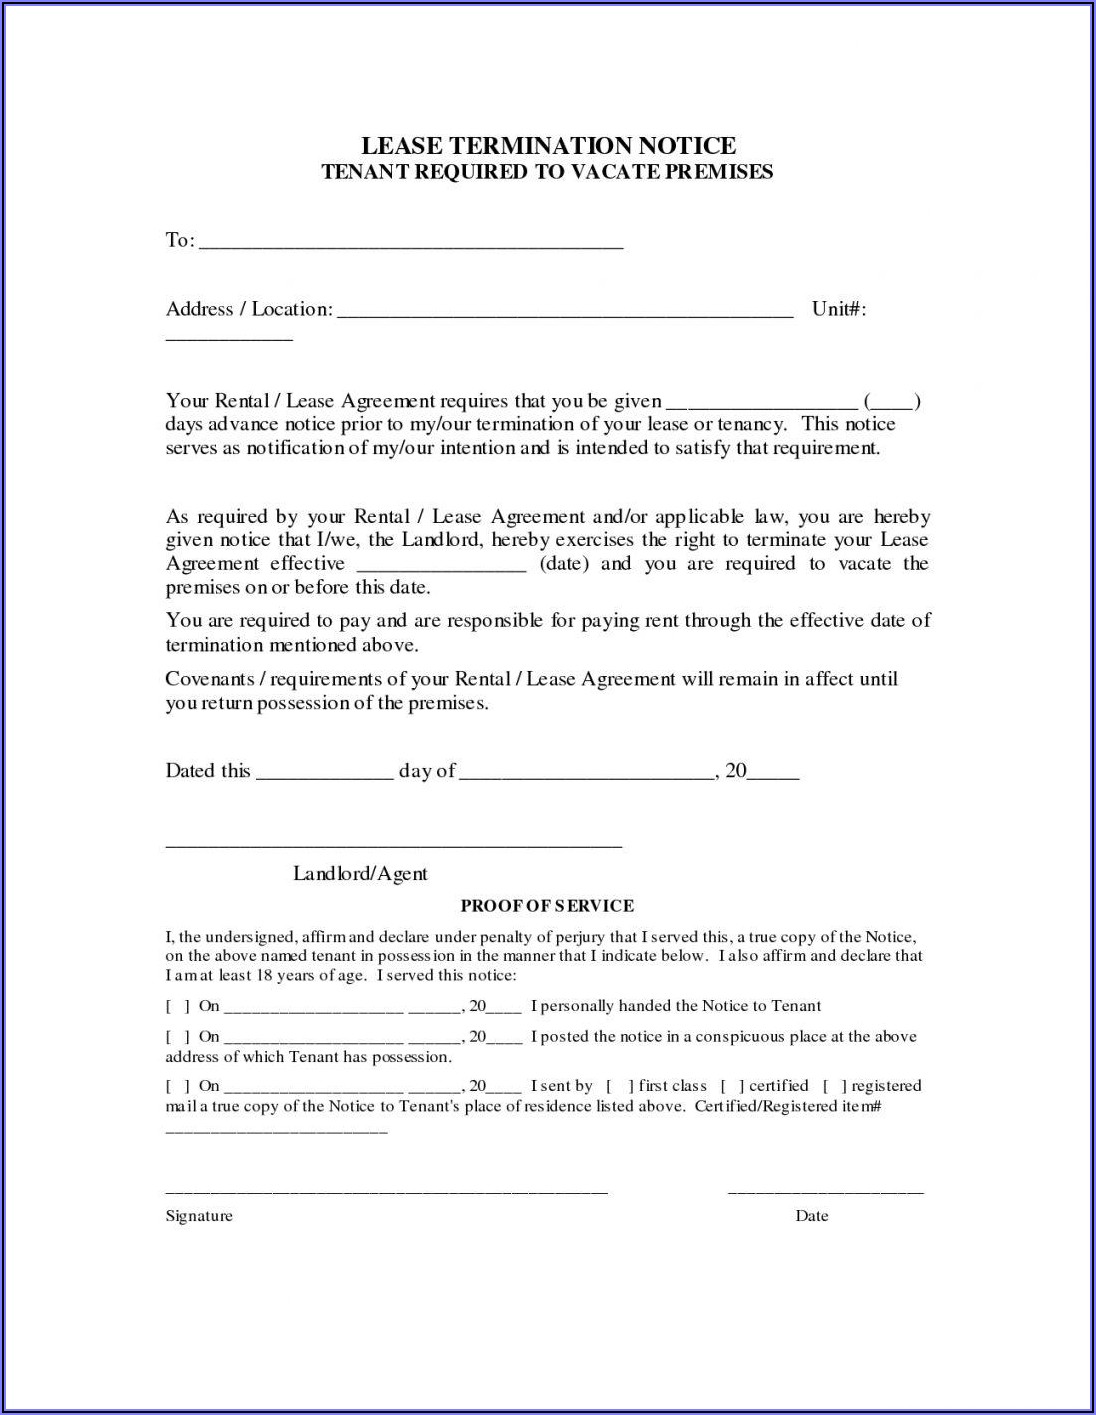 Landlord And Tenant Contract Sample